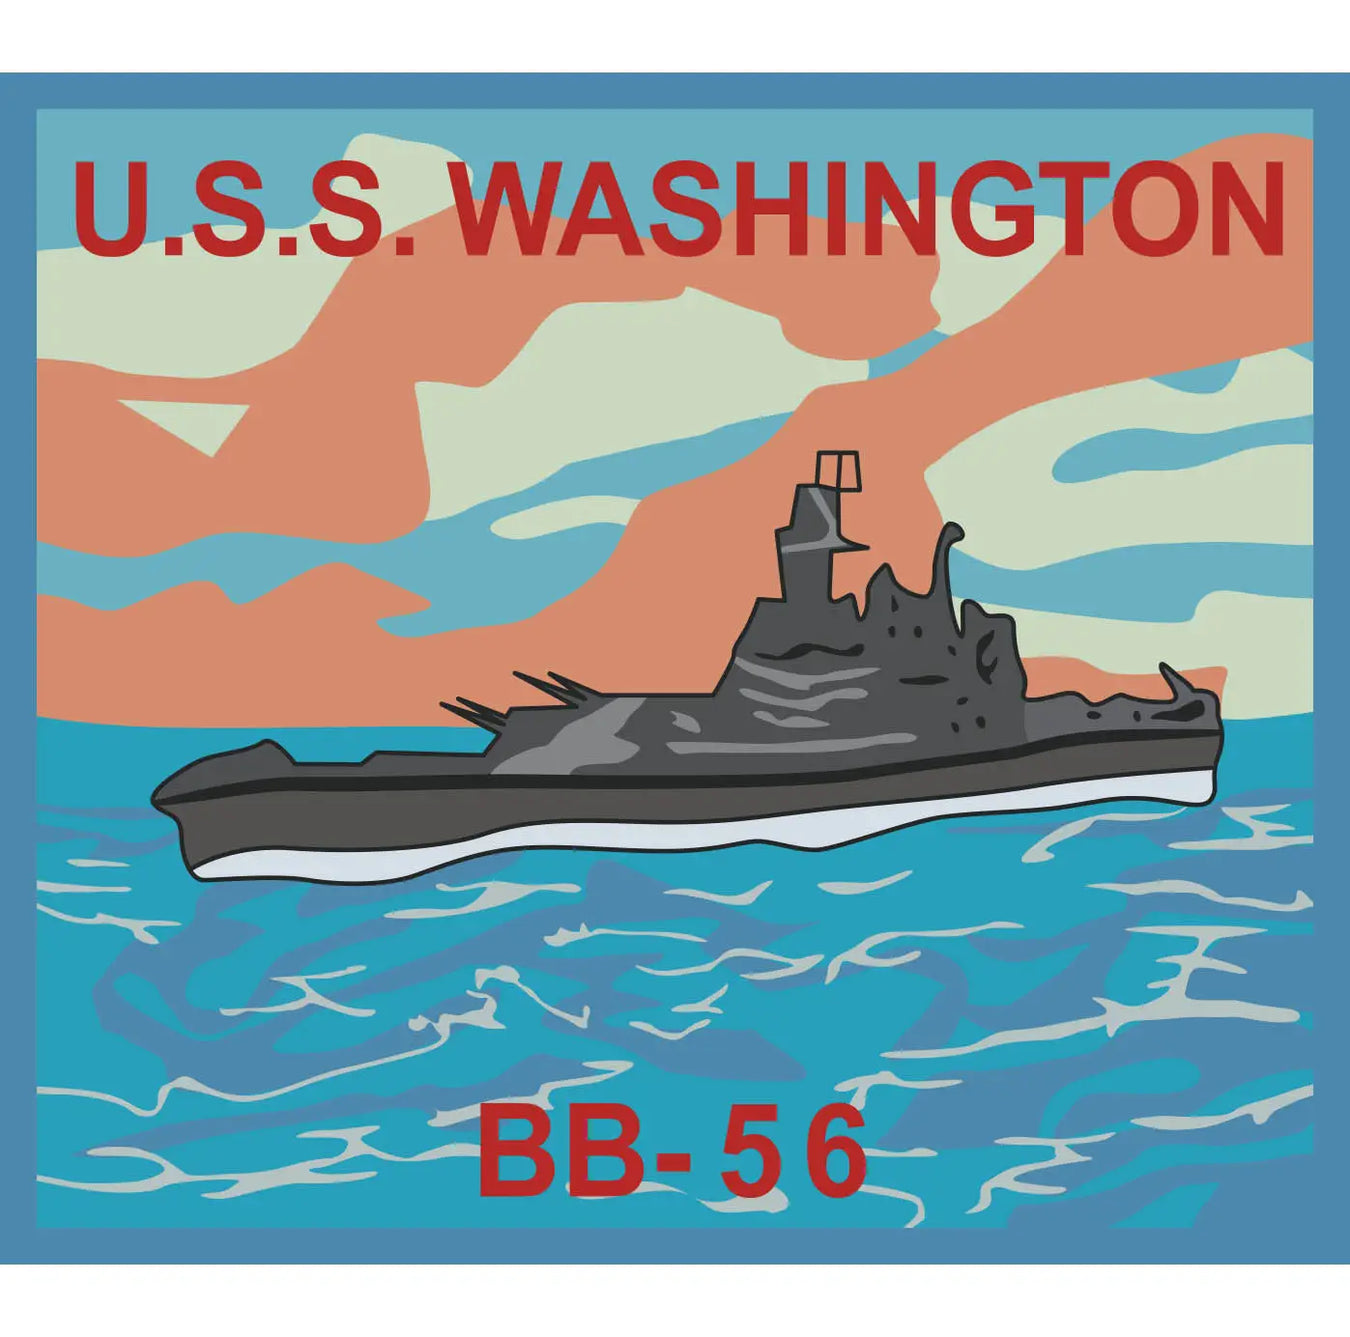 USS Washington (BB-56) Merchandise - Shop T-Shirts, hoodies, patches, pins, flags, decals, hats and more.